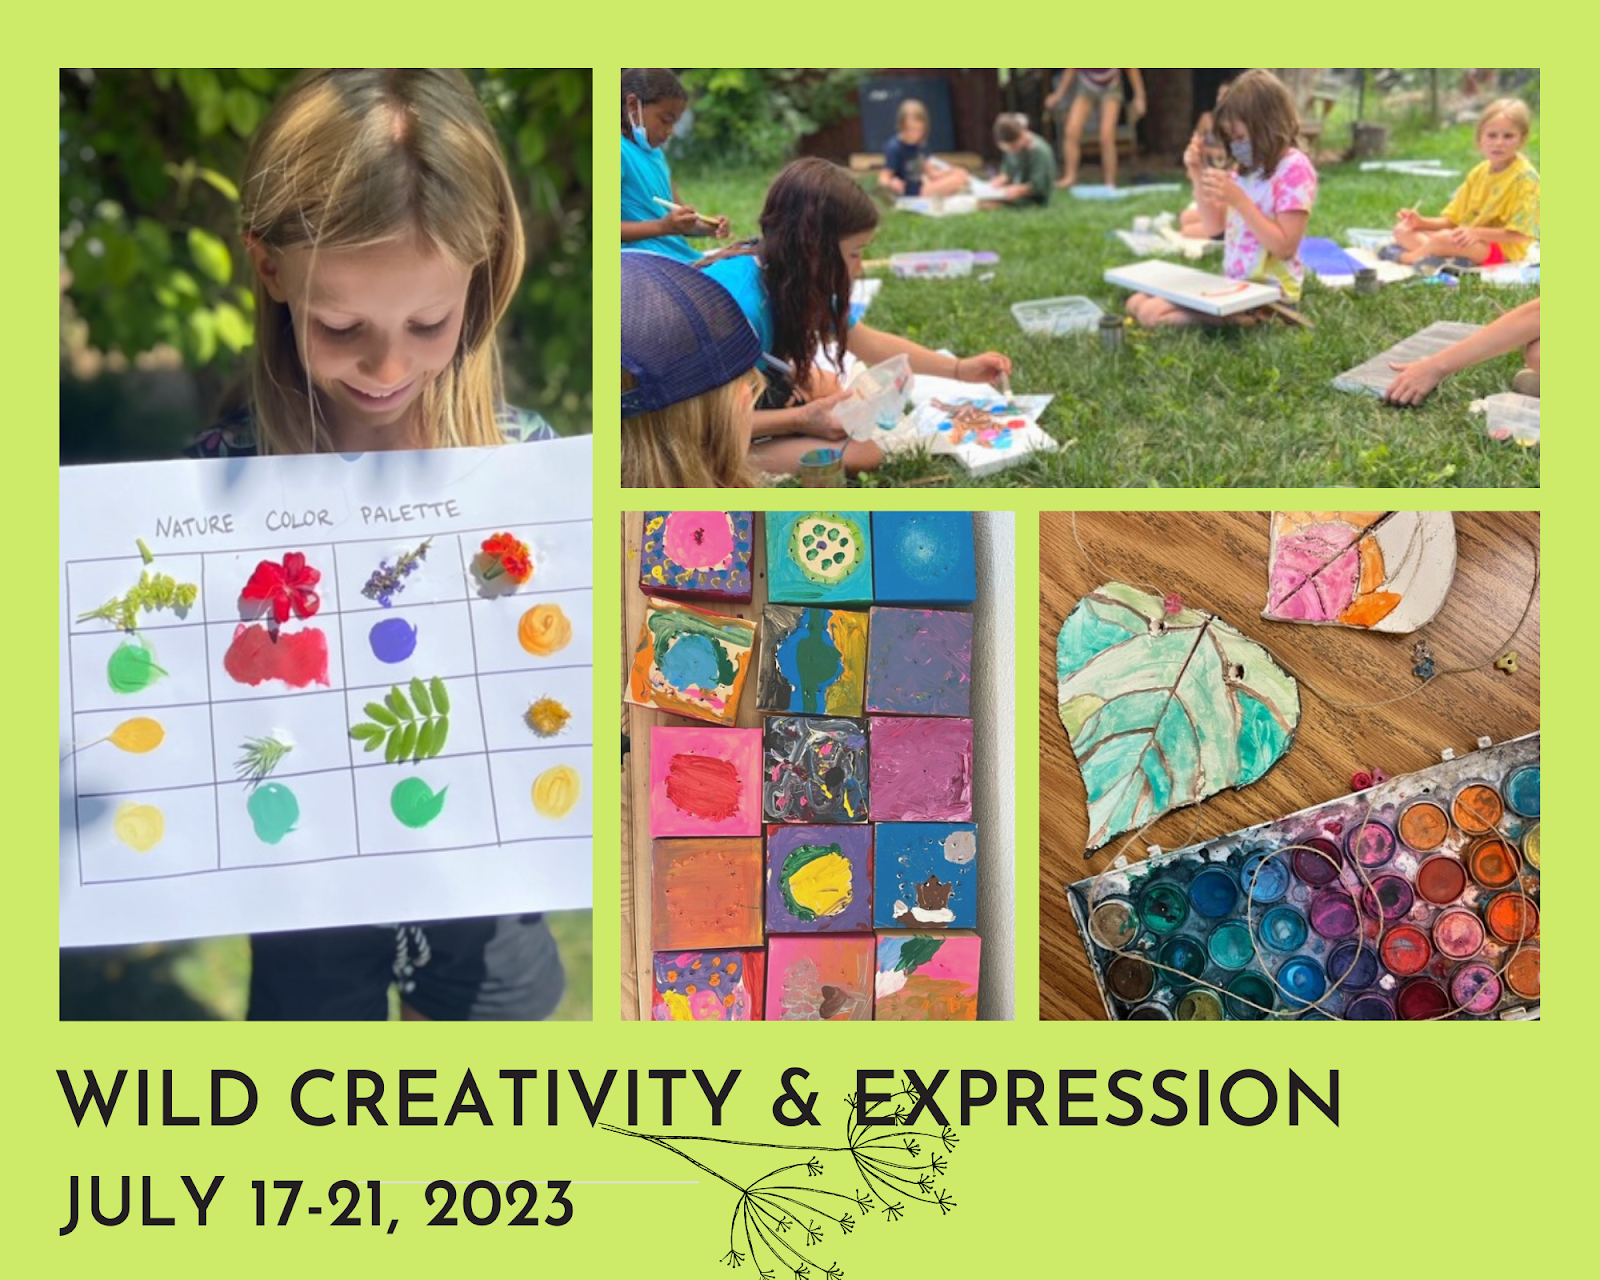 A photo collage from Wild Roots Studio shows a girl holding a nature color palette; painted tiles; watercolors and painted leaves; and children painting in a field. Text reads: “Wild Creativity & Expression: July 17-21, 2023.”